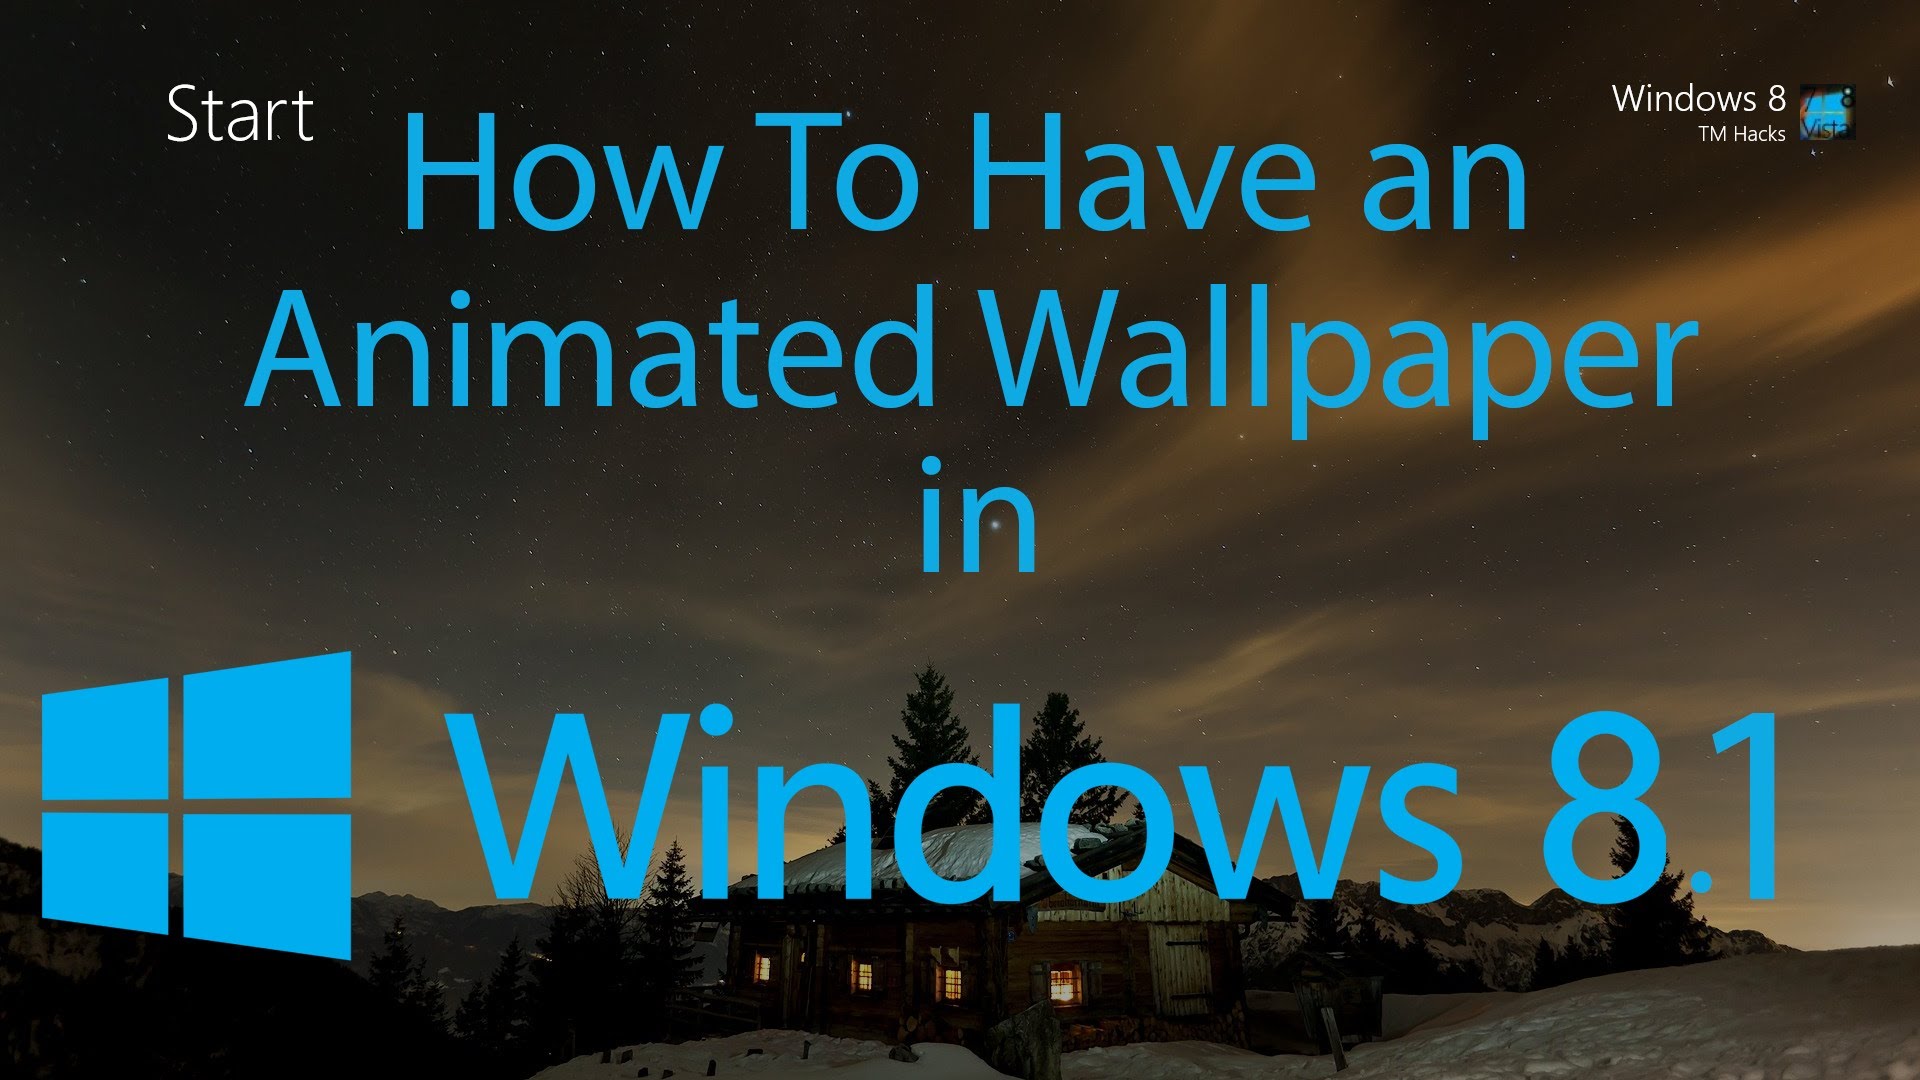 live animated wallpapers for windows 10